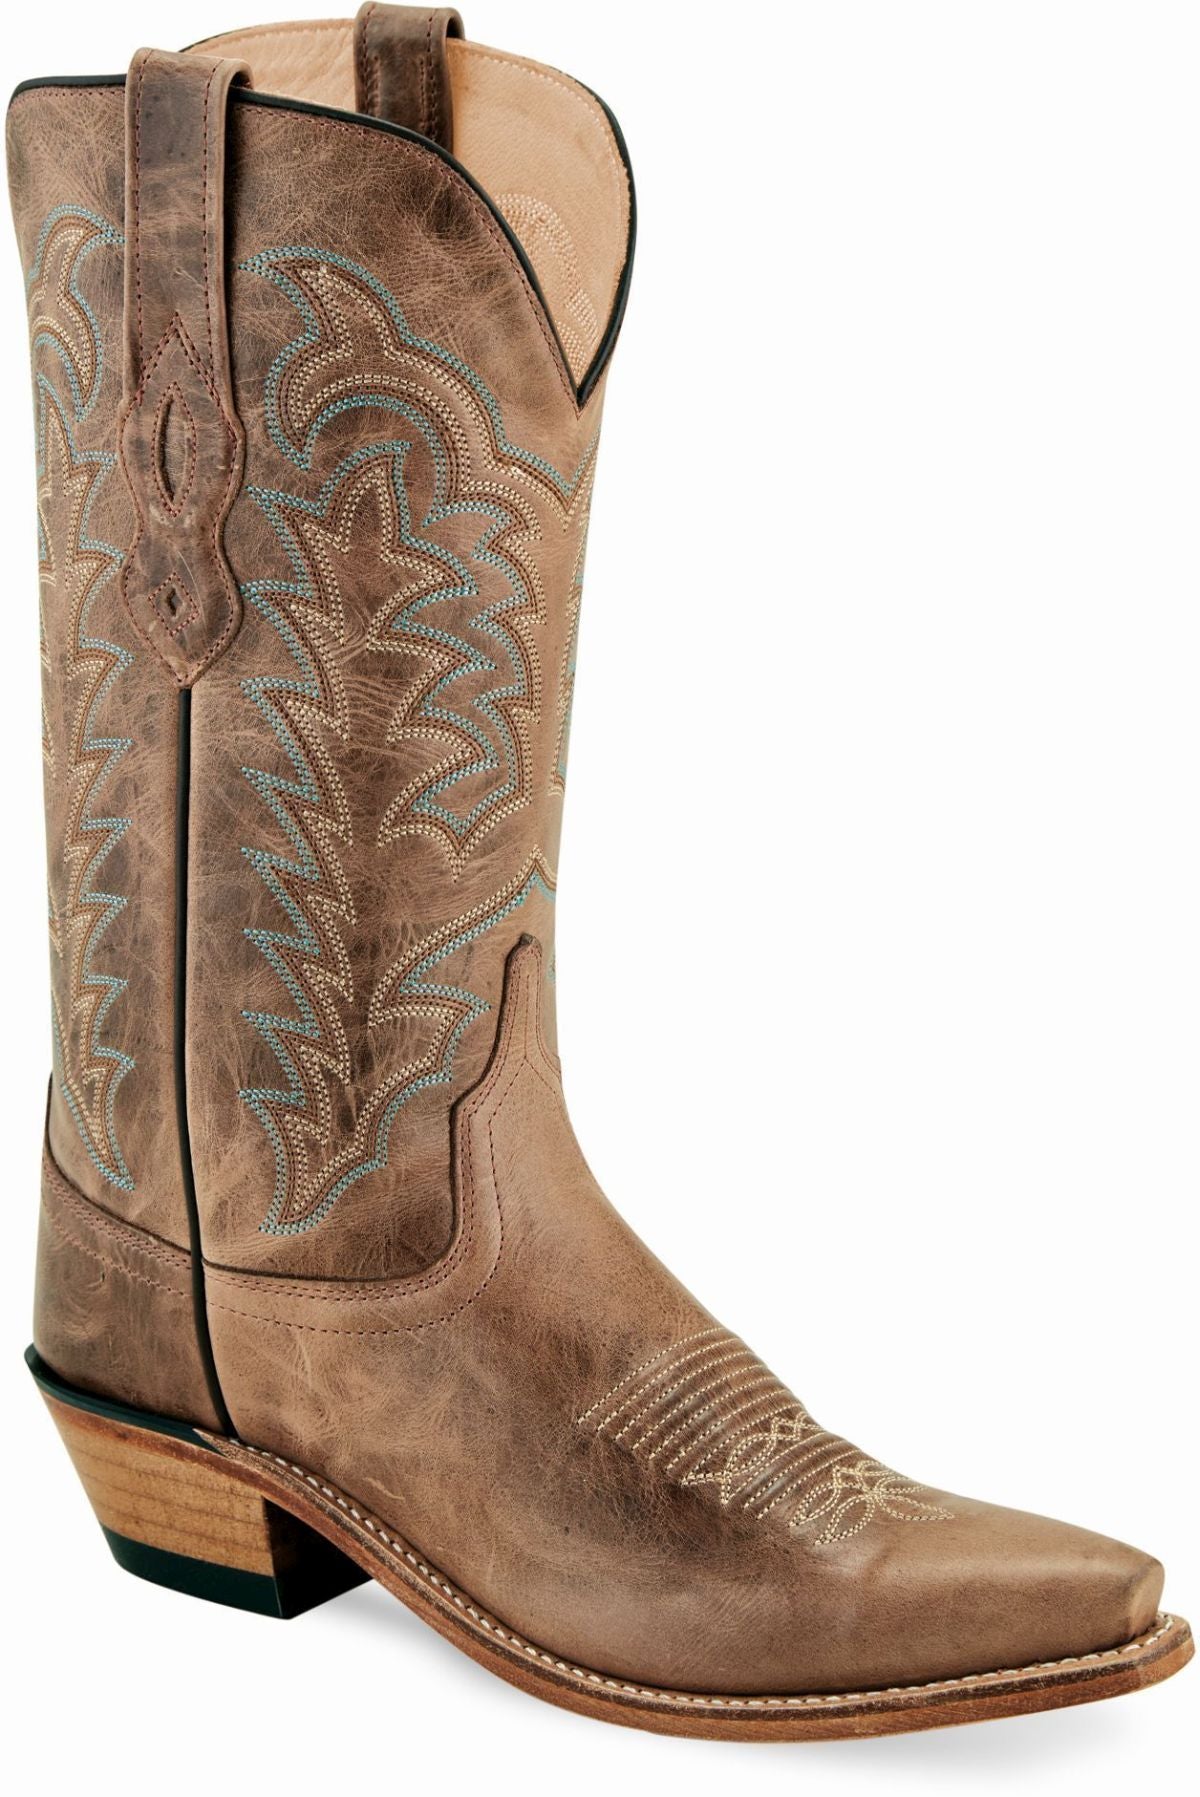 Old West Cactus Brown Women's Fashion Wear Boots